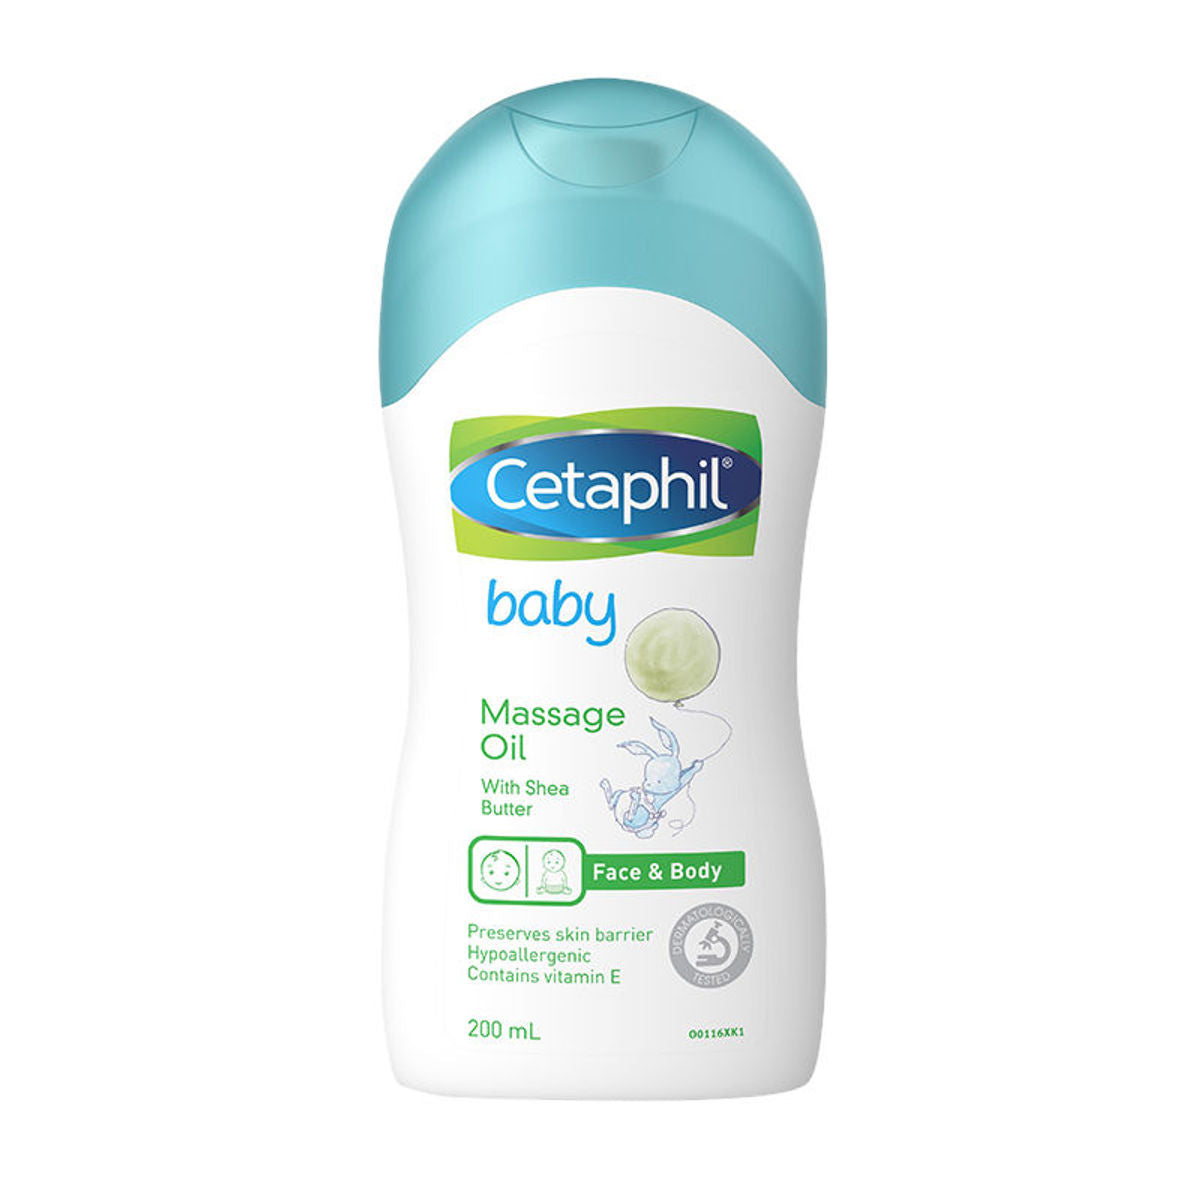 Cetaphil Baby Massage Oil with Shea Butter for Face & Body (200 ml) Cetaphil Baby